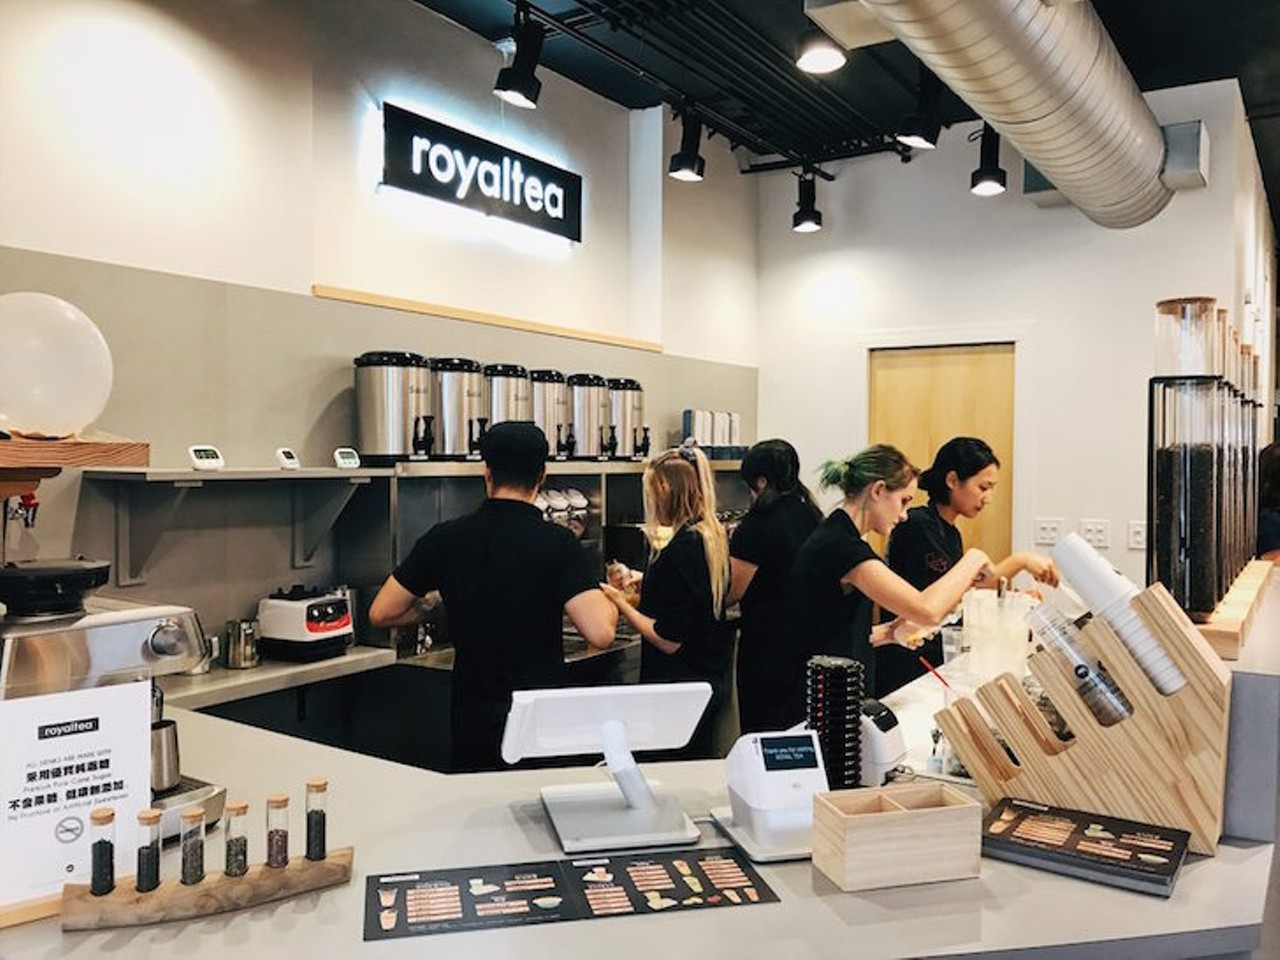 ROYAL TEA  
714 N. Mills Ave.
Yes, we know tea is in the name, but there&#146;s coffee, too. Trust us. Try their traditional mousse coffee or an Americano while you&#146;re there. 
Photo via Yelp/Michael C.